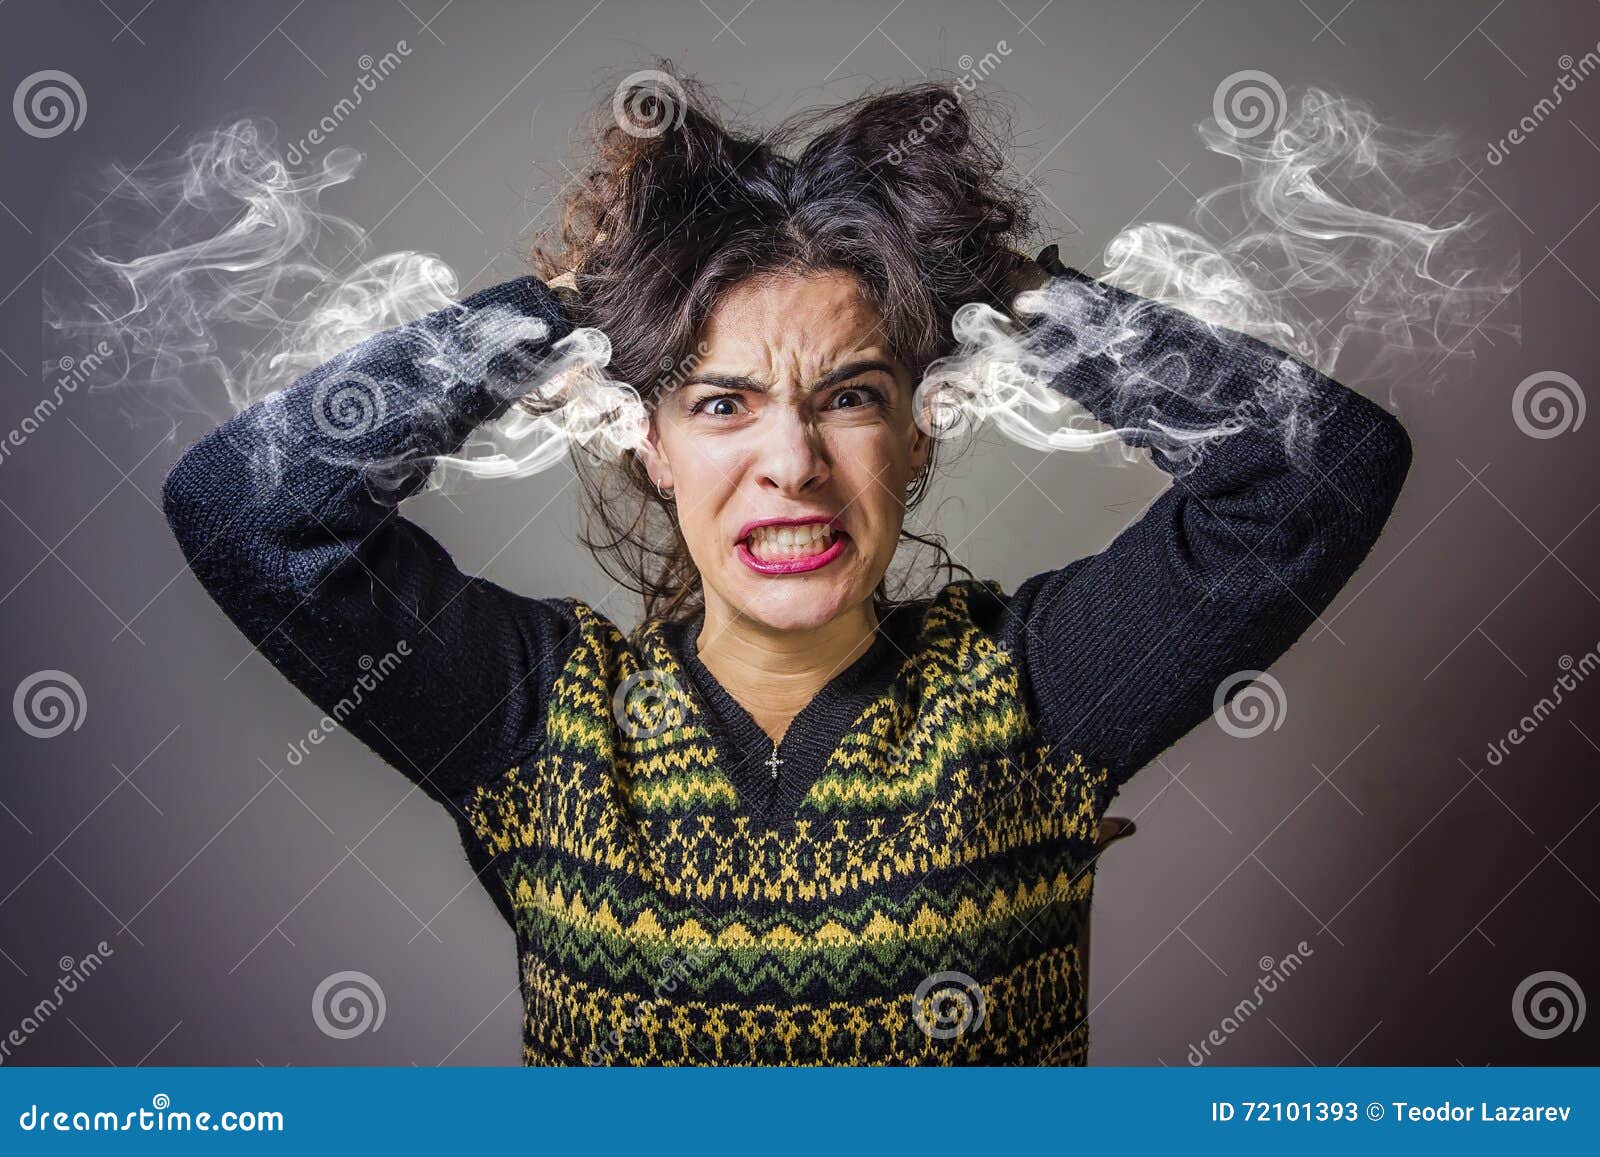 woman steaming with rage